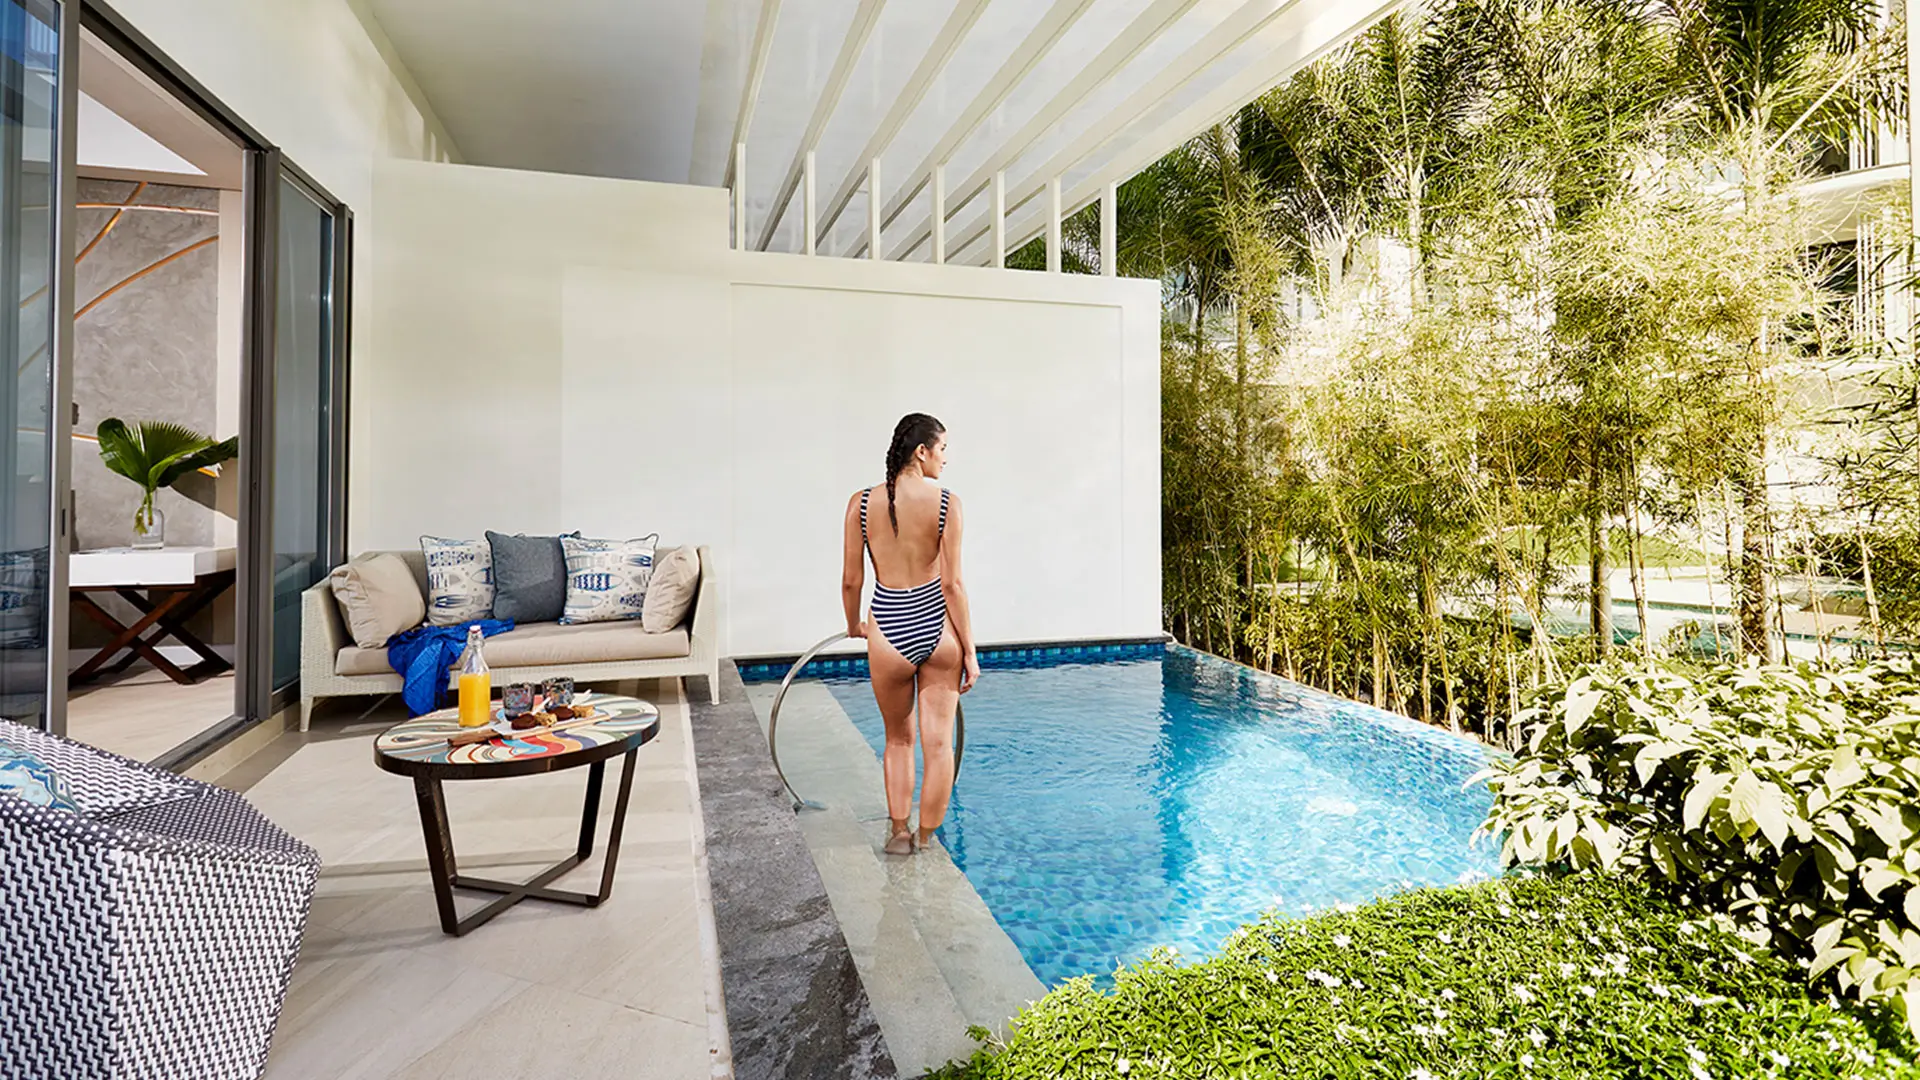 Cozy poolside lounge area at The Lind Boracay, a Boracay boutique resort, featuring modern furniture, a refreshing pool, and lush greenery, creating a tranquil escape.